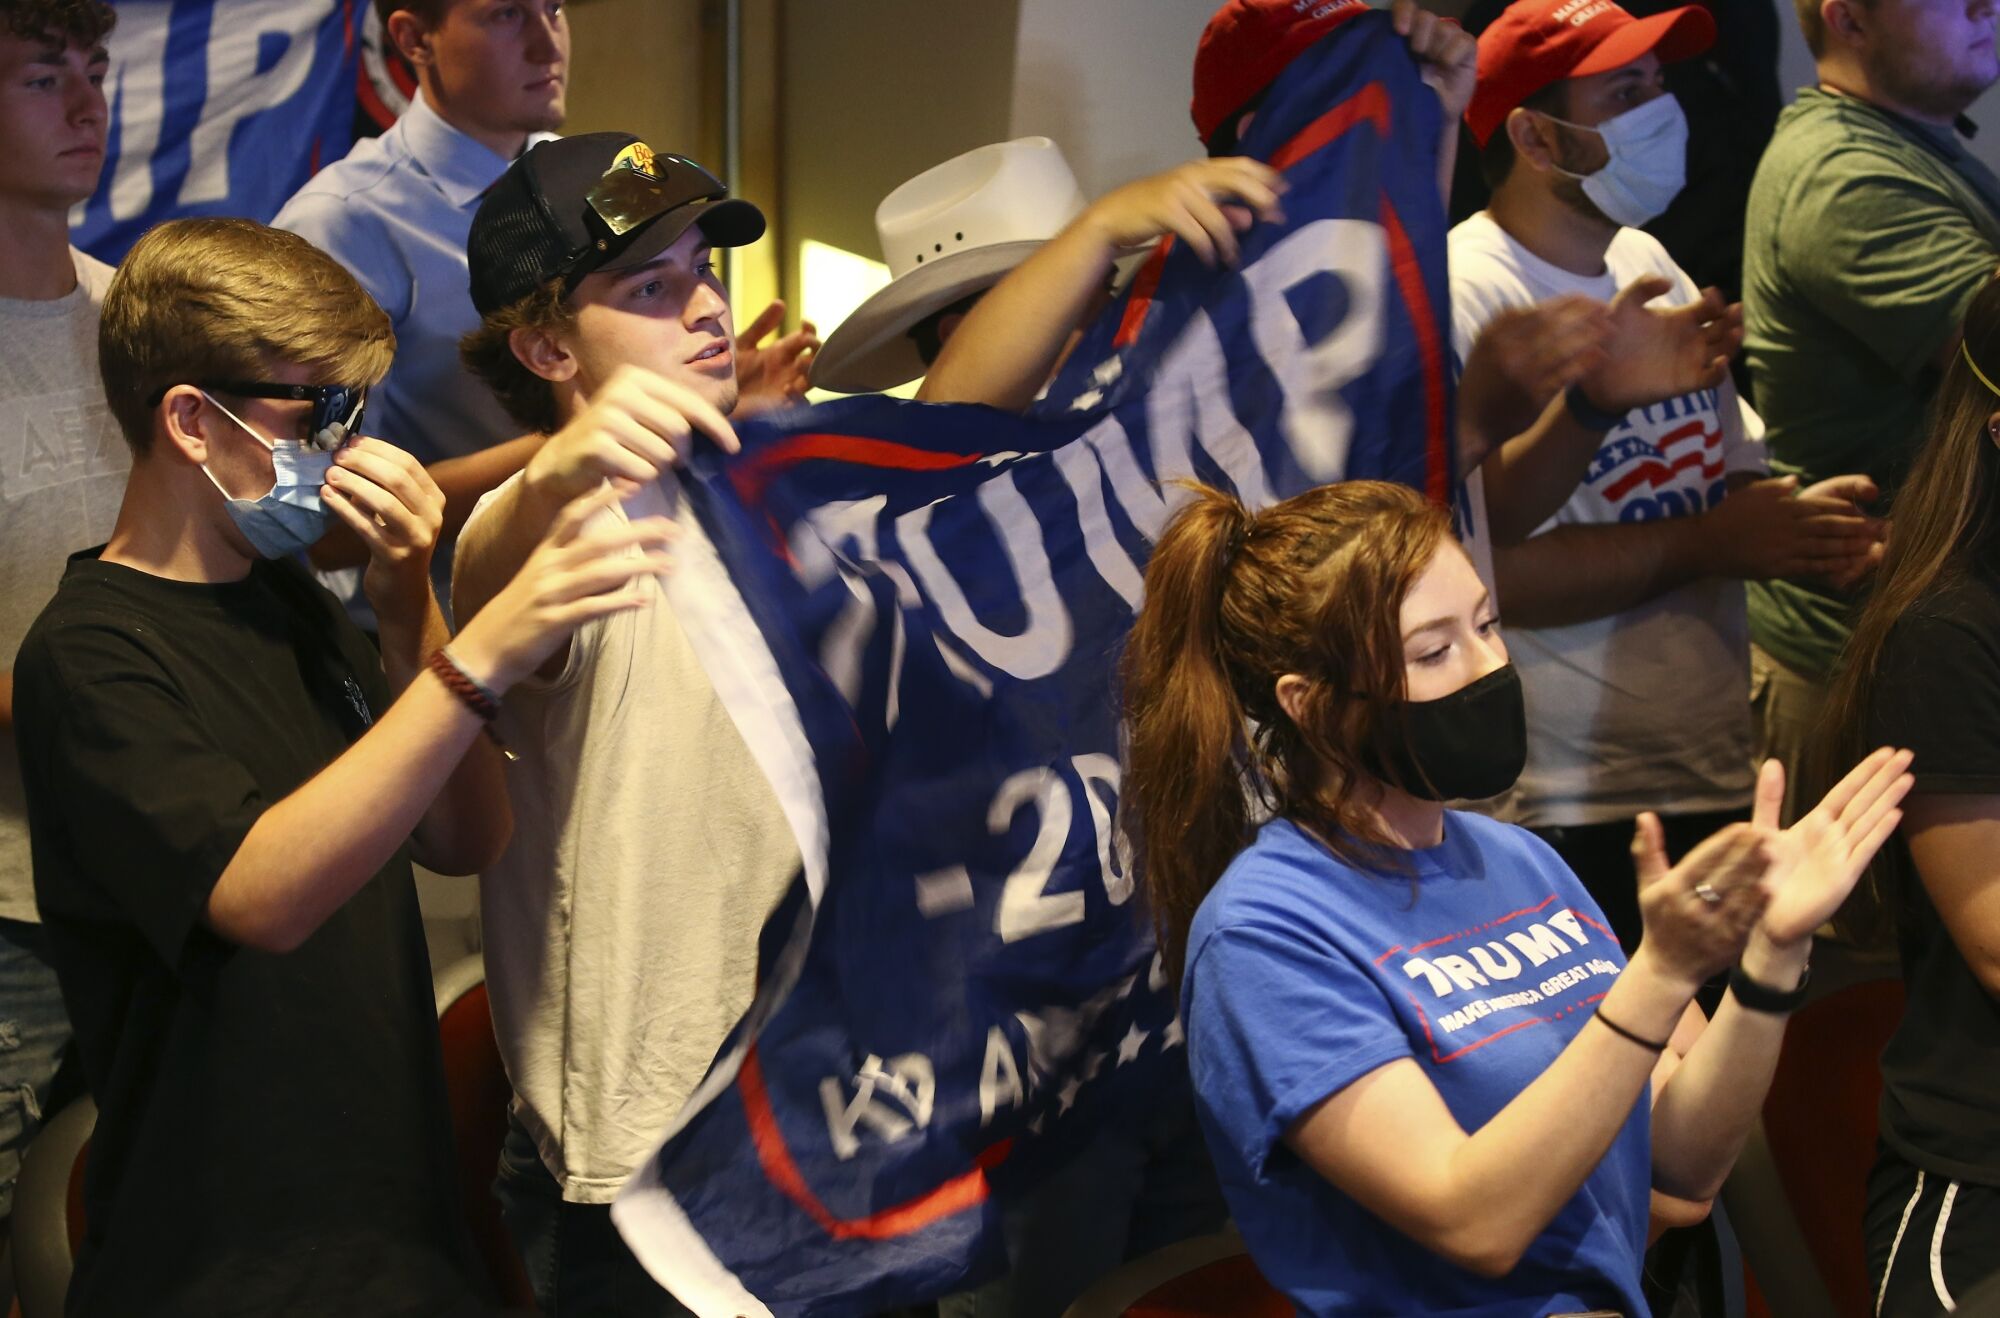 Young people, some of whom are masked, hold up a campaign banner bearing the word Trump 